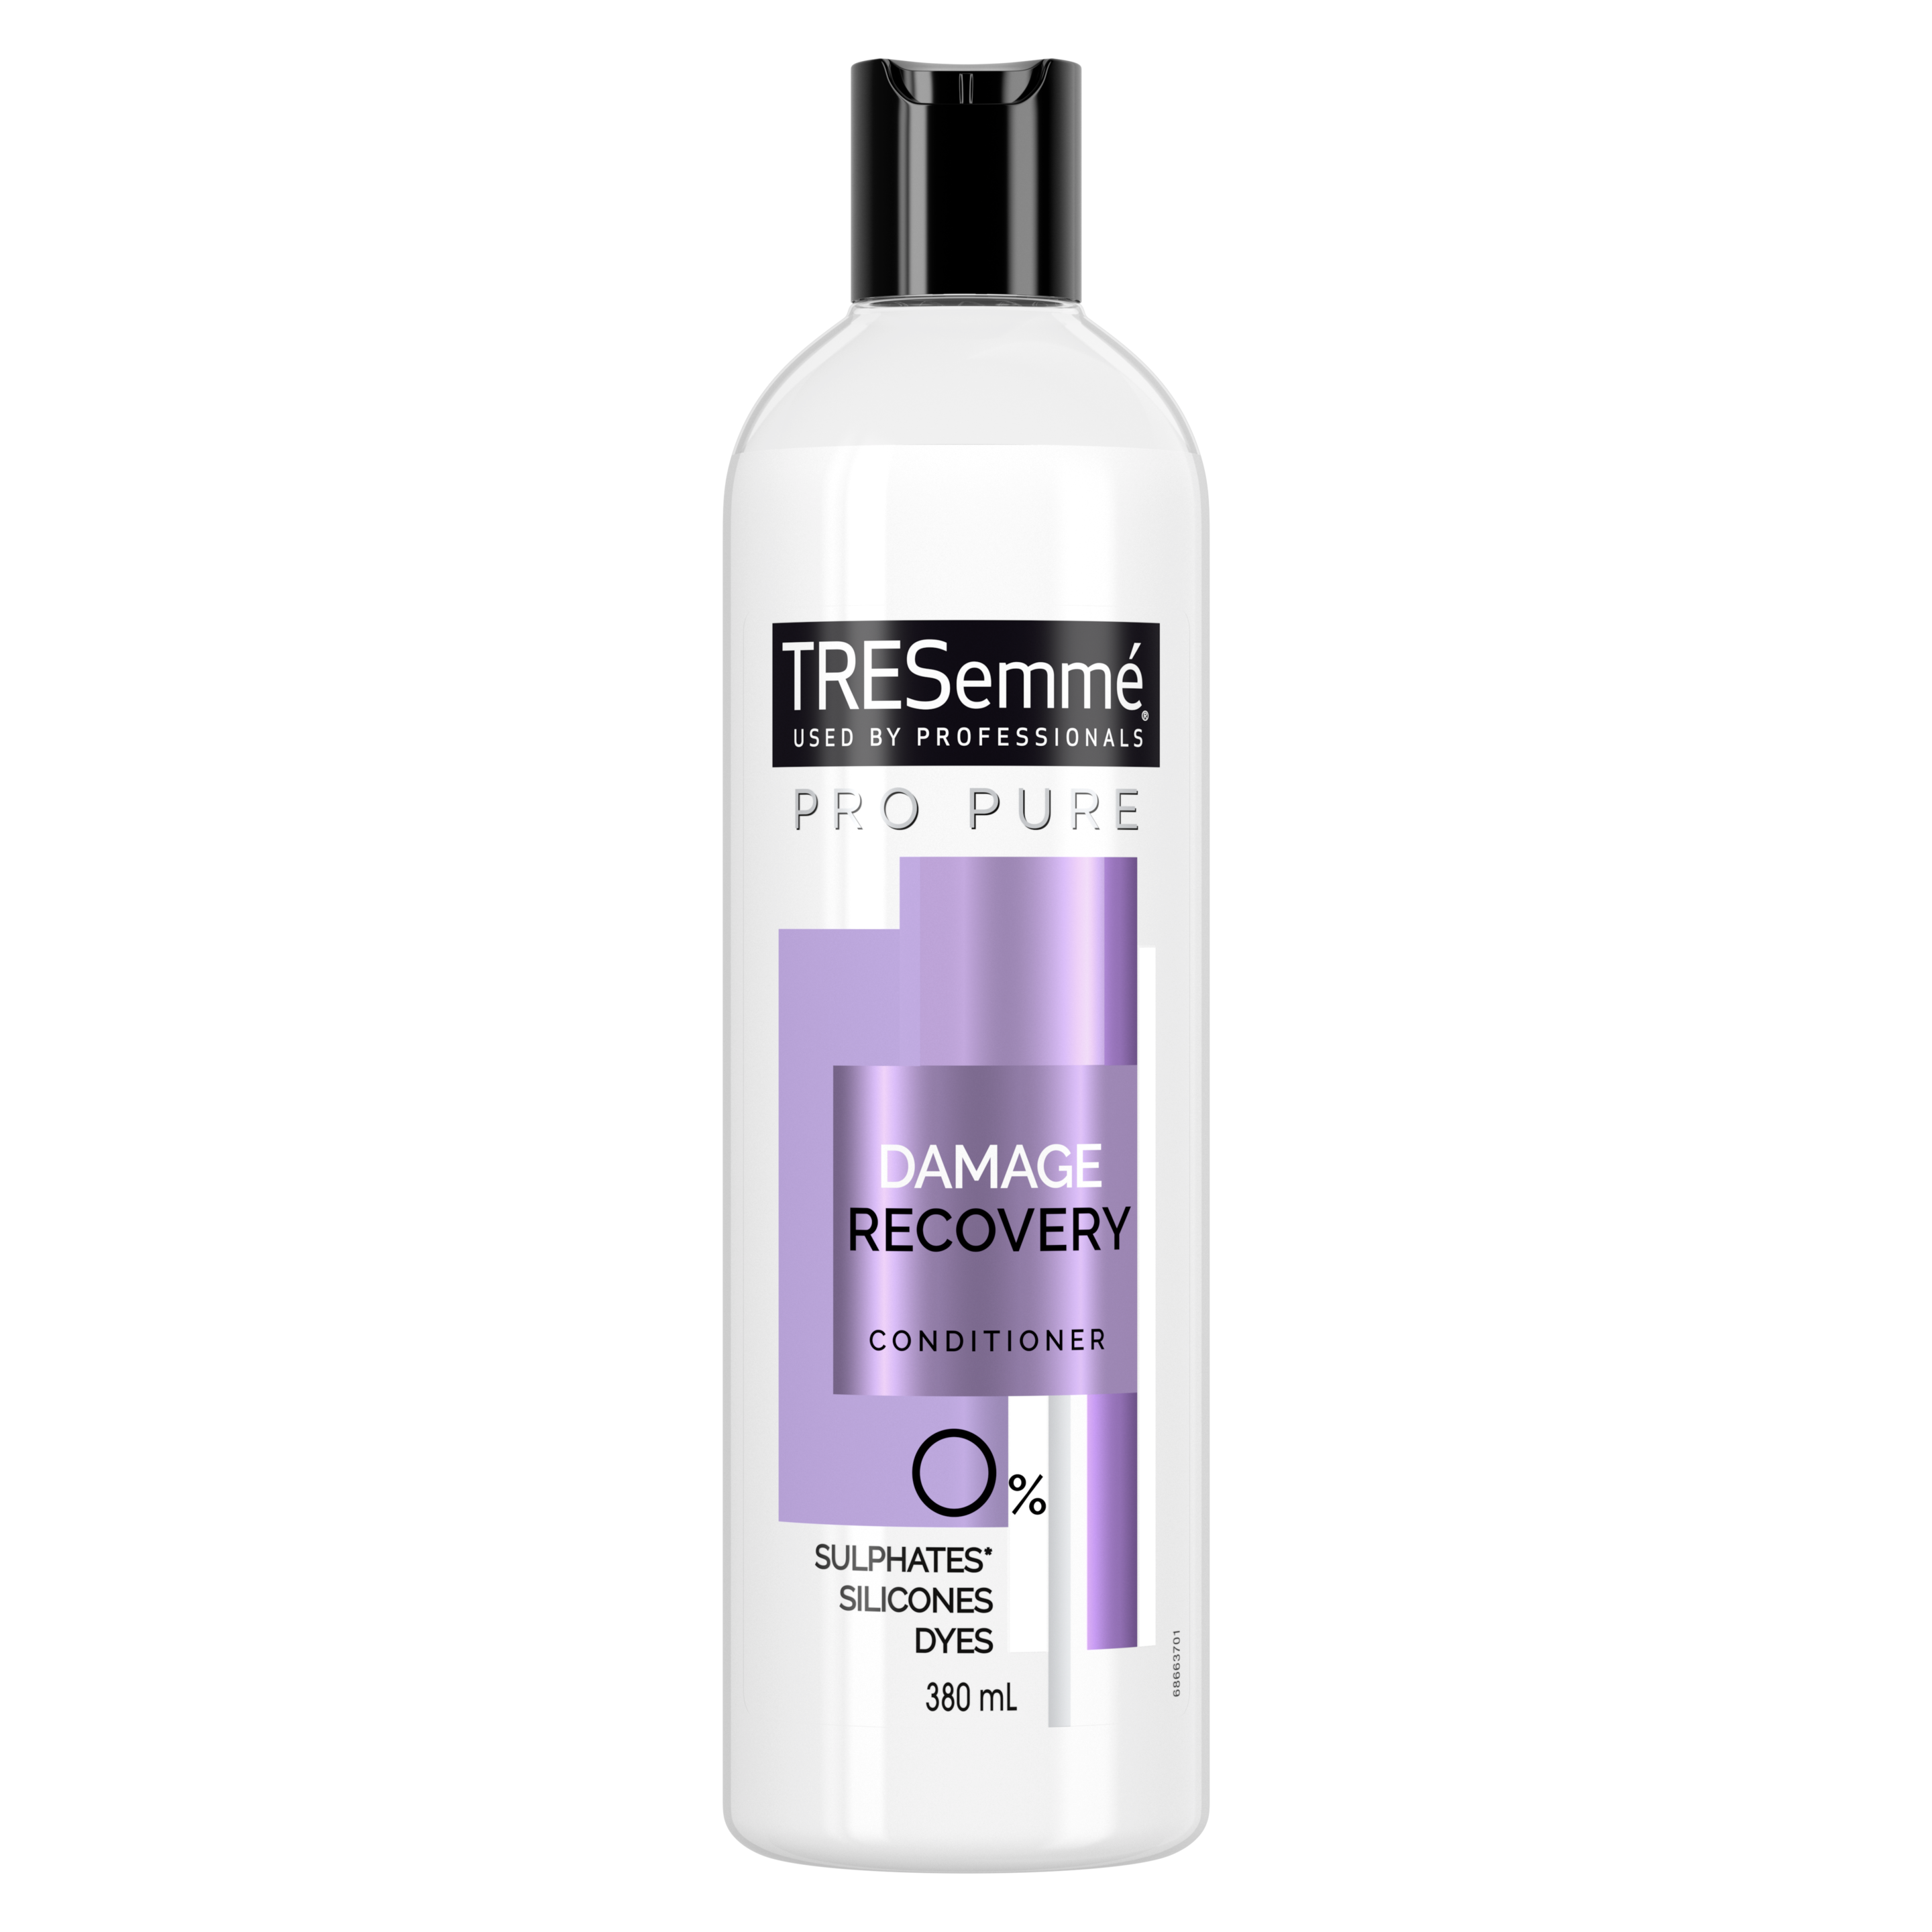 A 380ml bottle Tresemme Pro Pure Damage Recover Conditoner front of pack image